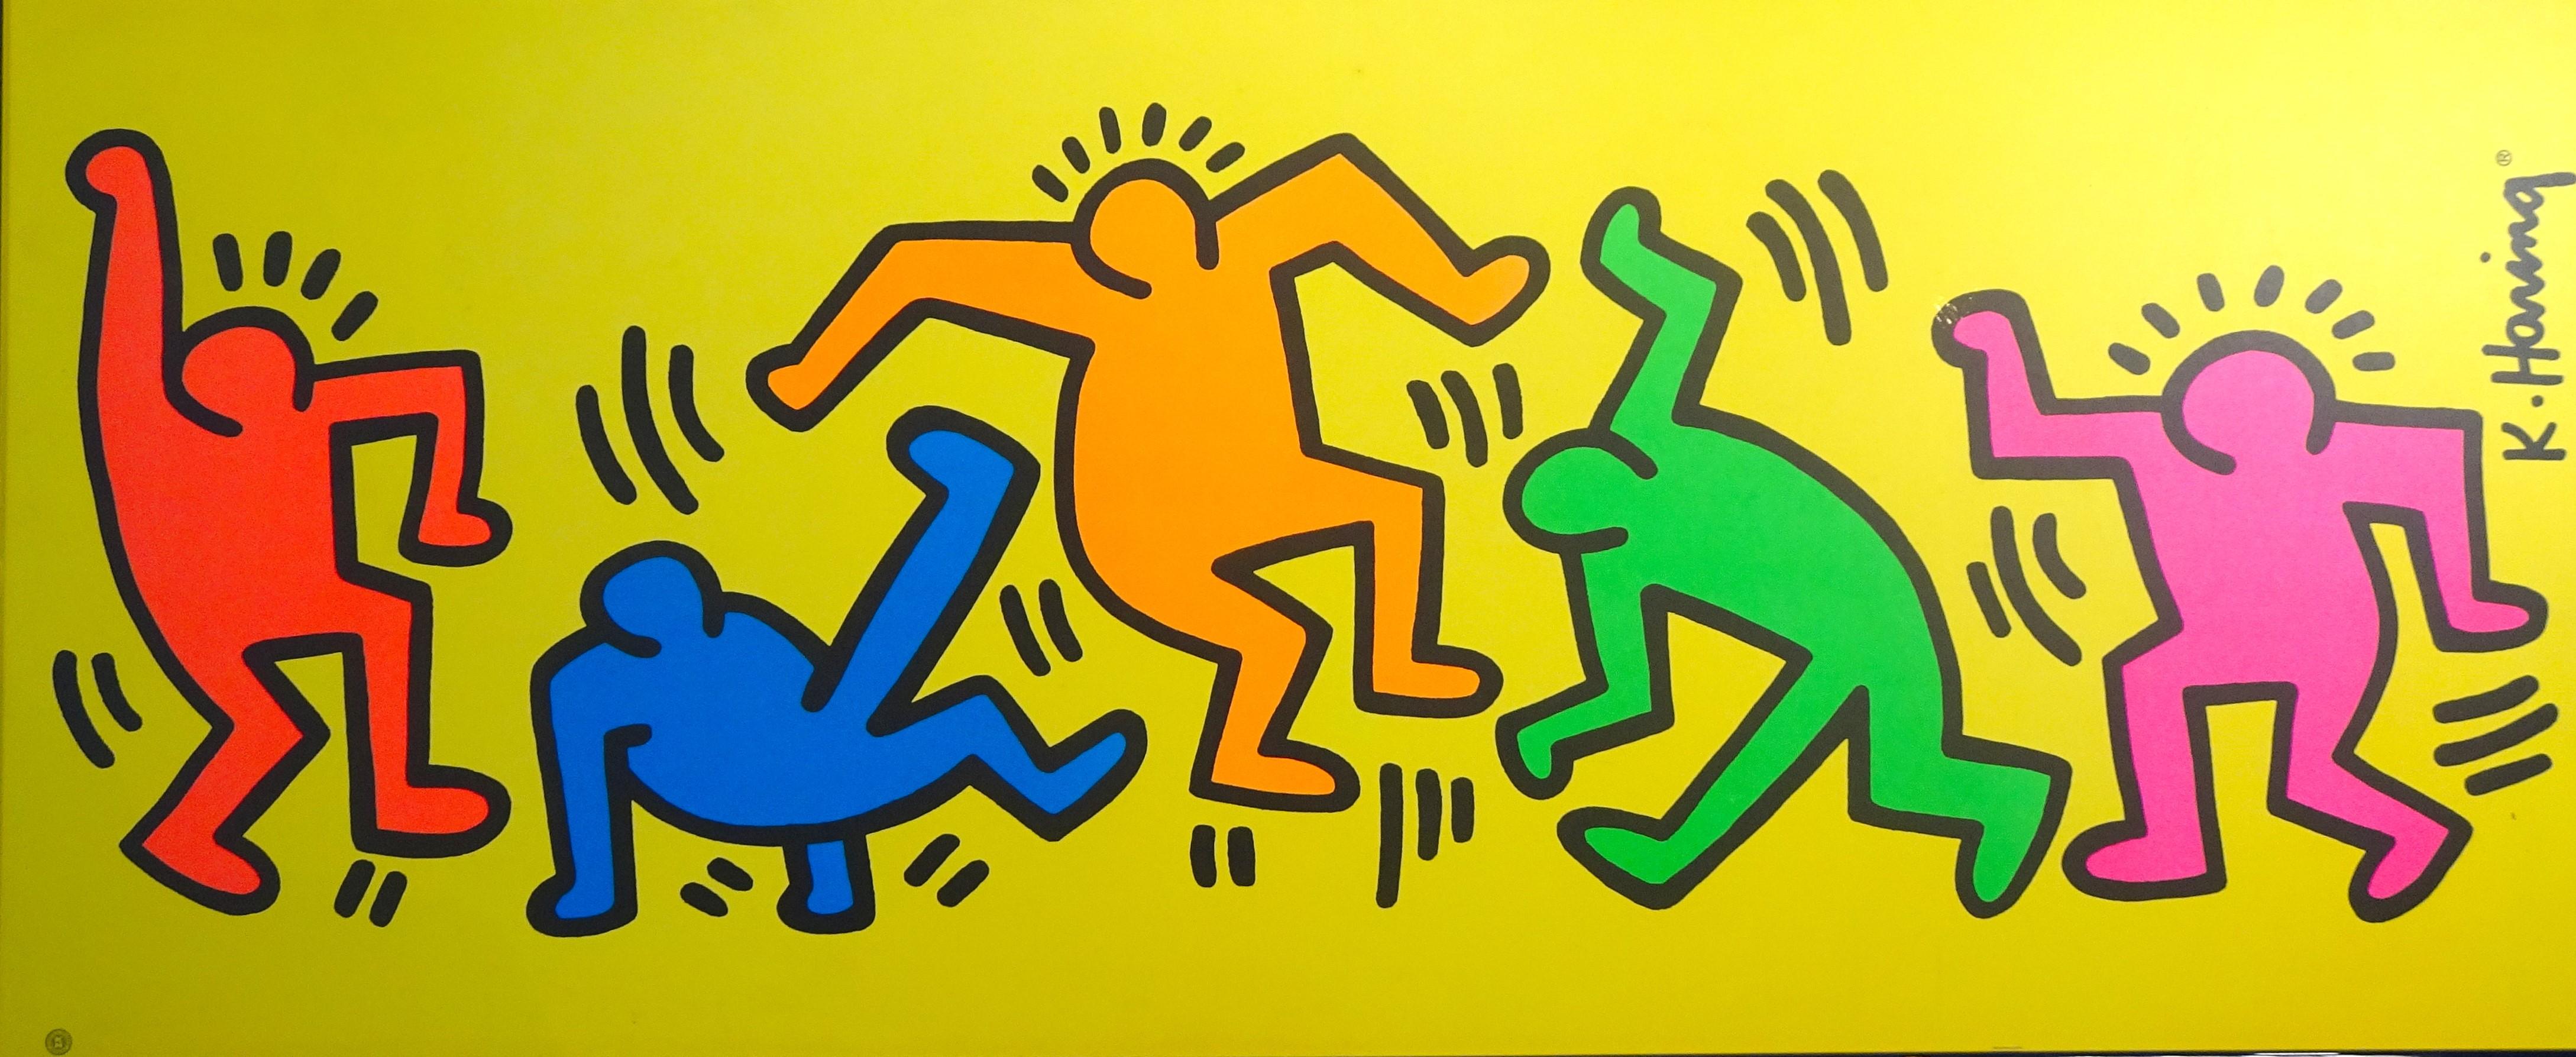 keith haring figures